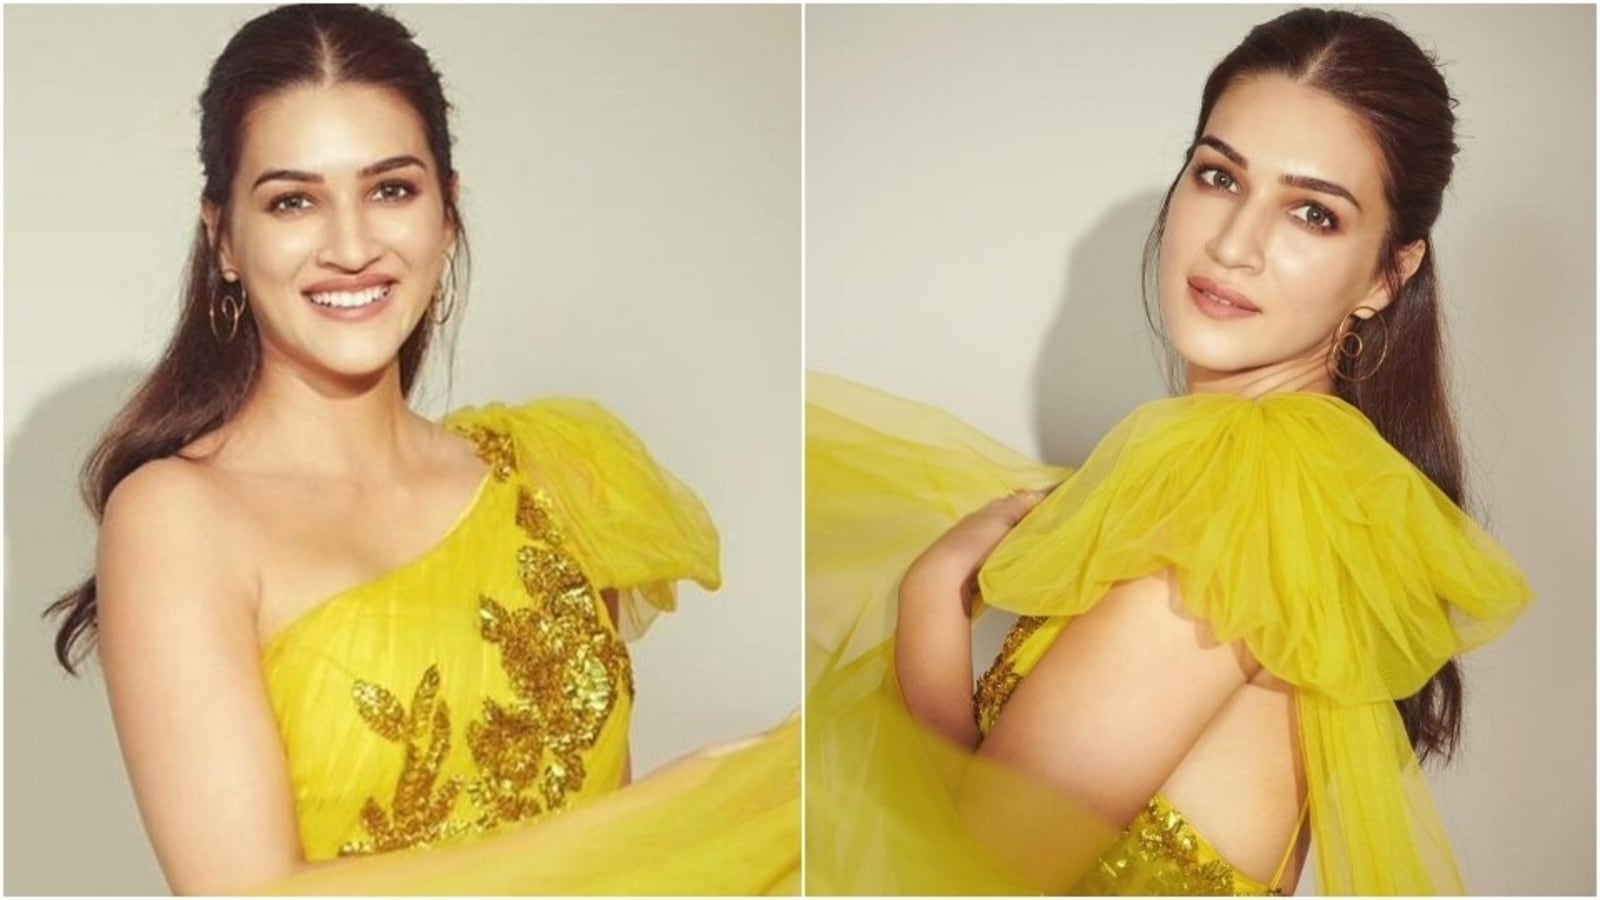 Kriti Sanon In A Beautiful Gown | Fashion, Beautiful gowns, Dresses